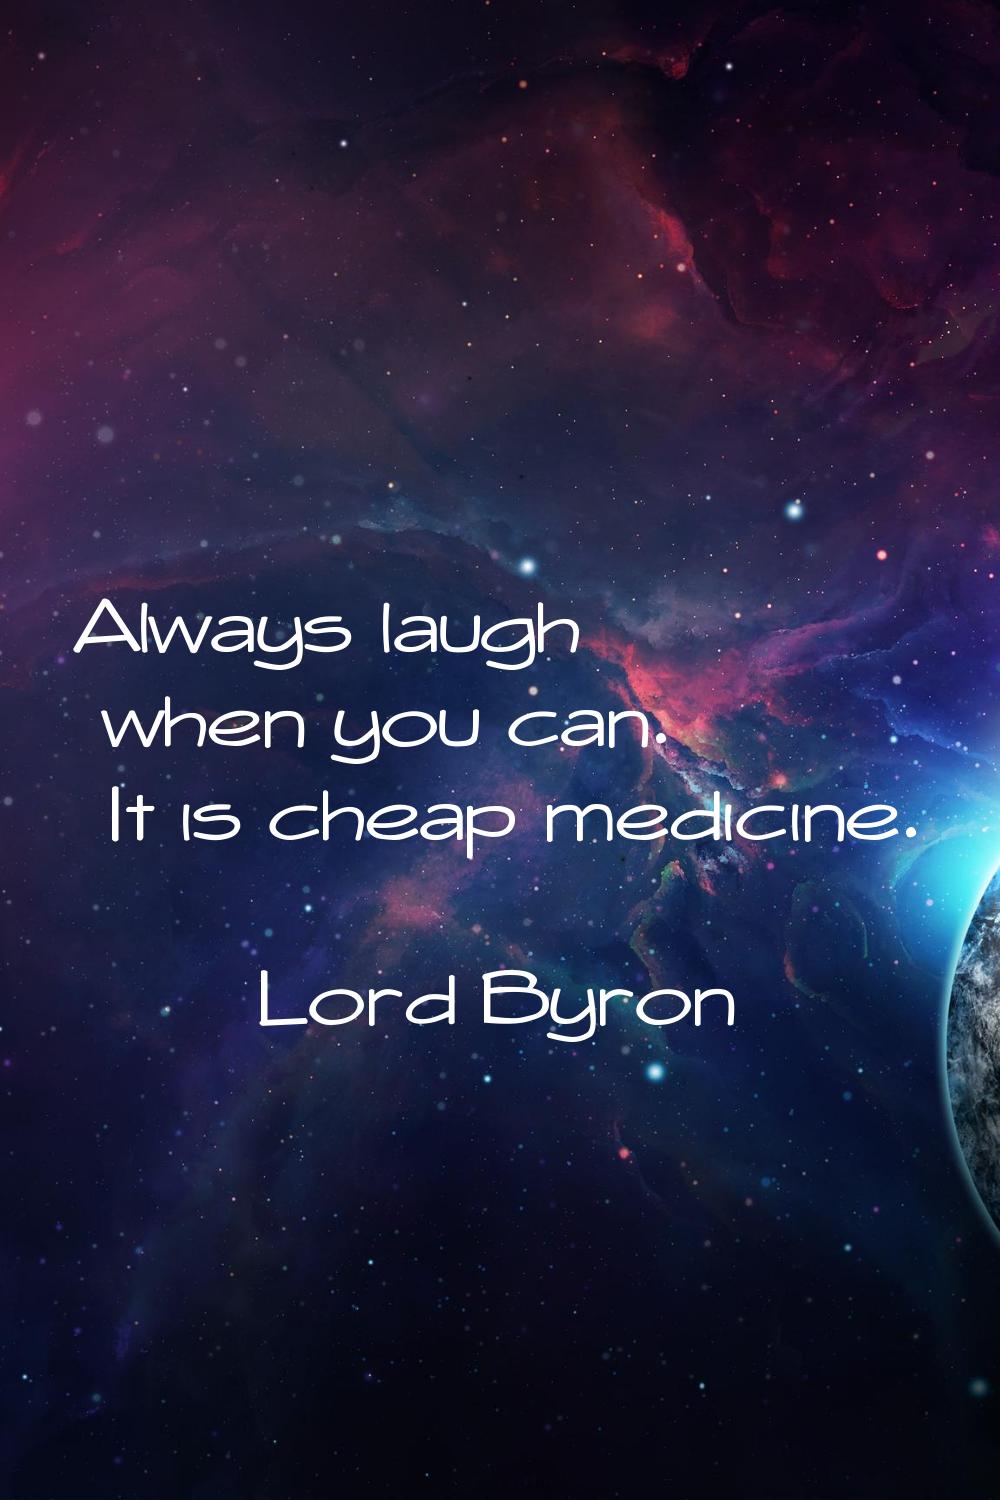 Always laugh when you can. It is cheap medicine.